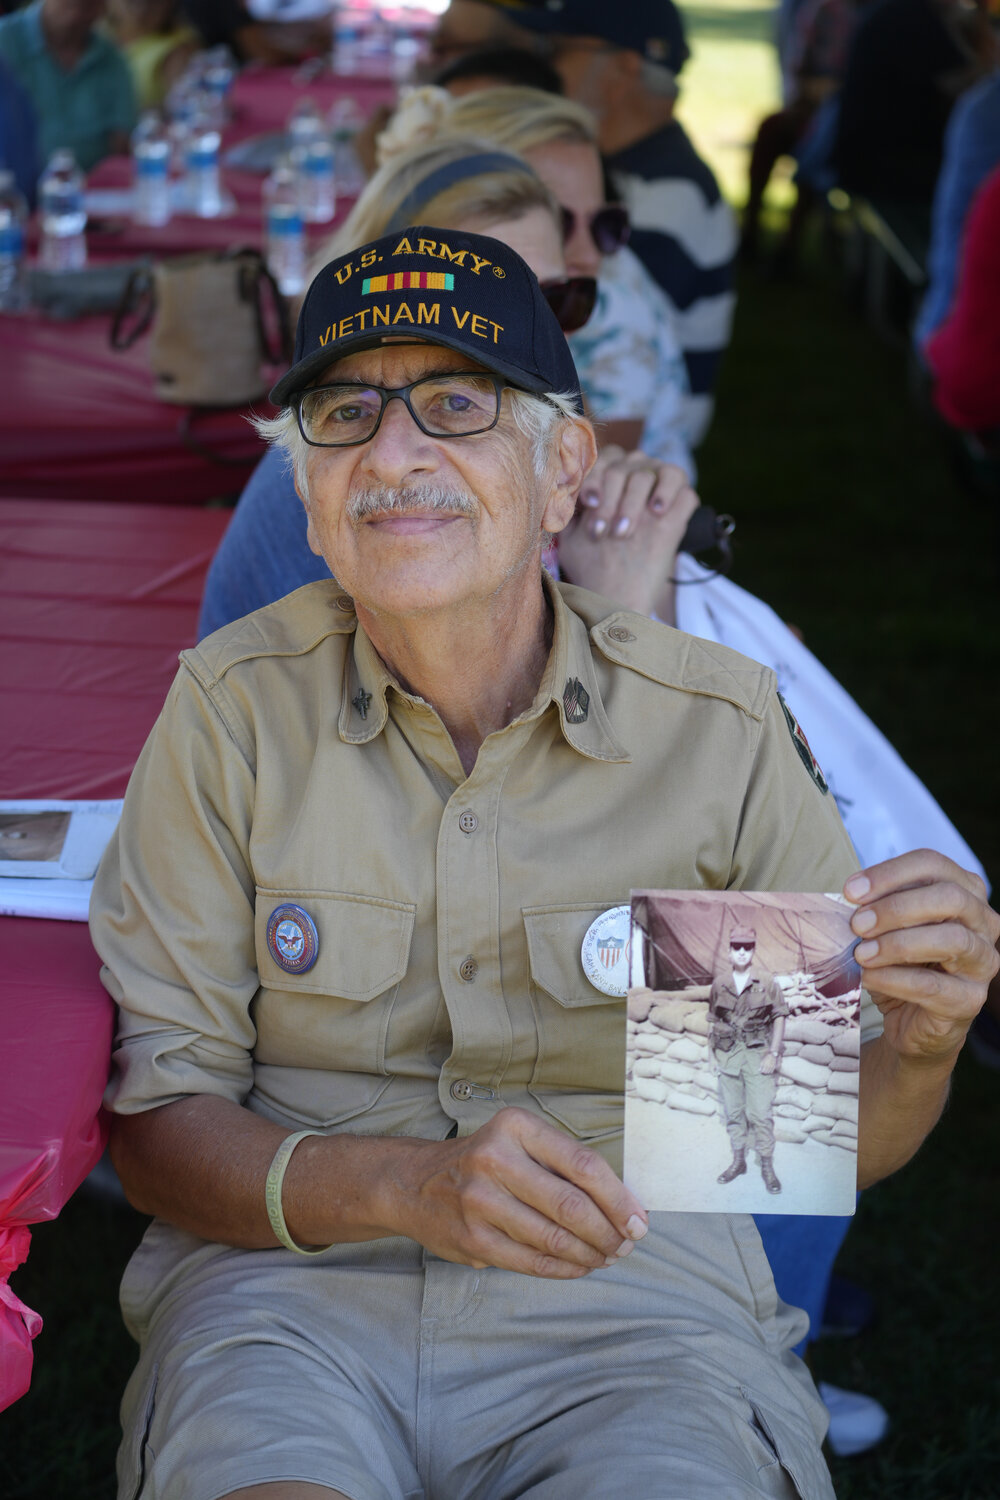 Veteran John Fackre with a photo of himself when he was deployed overseas.